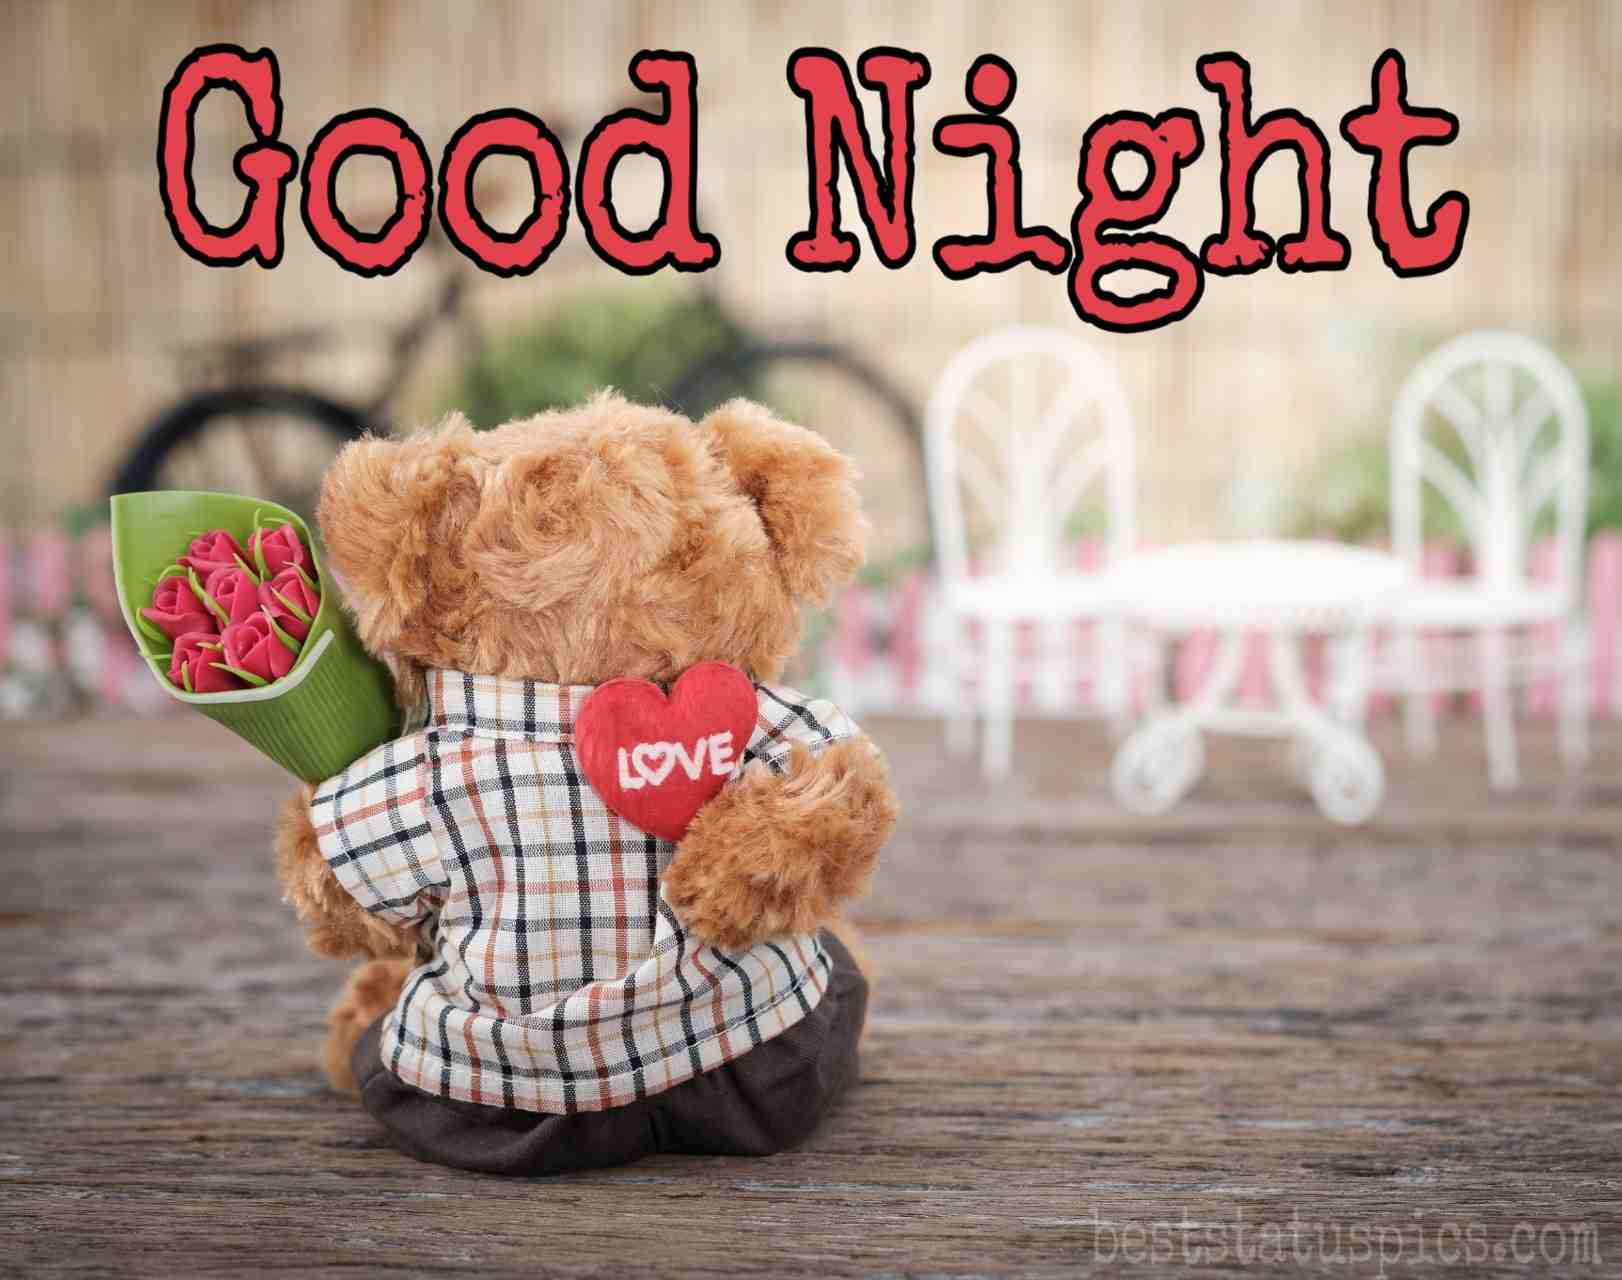 51+ Love Good Night Images with Teddy Bear and Doll HD - Best Status Pics